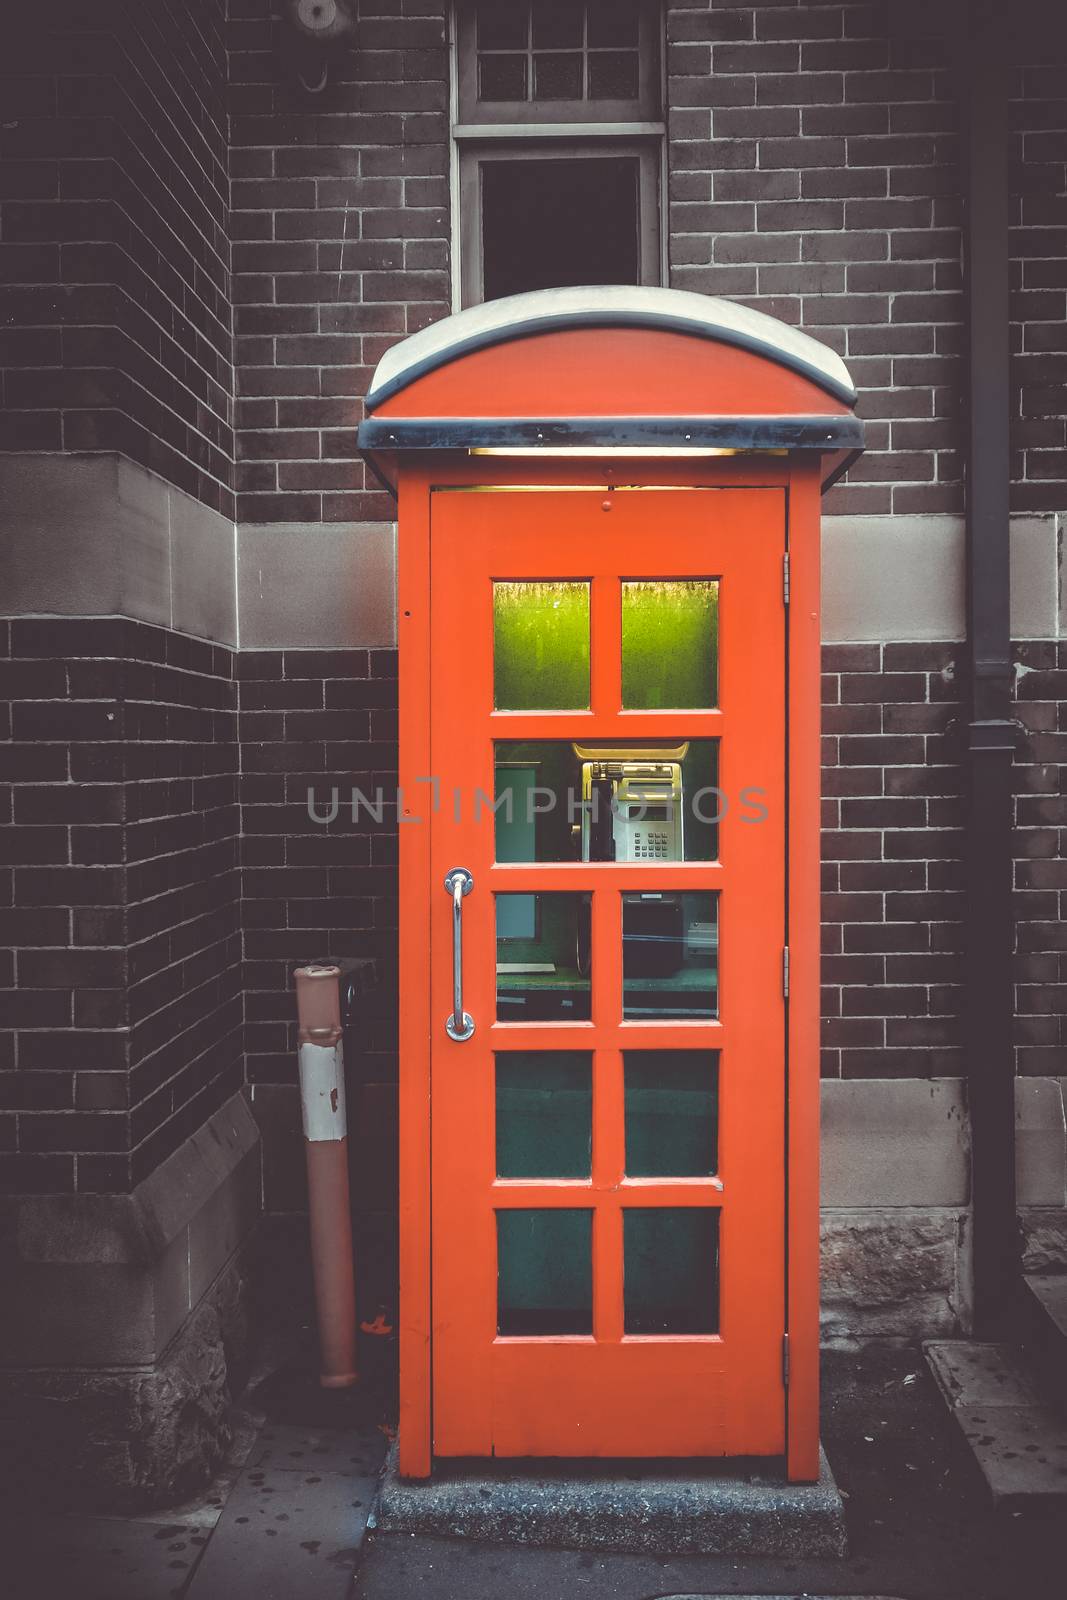 Vintage UK red phone booth by daboost